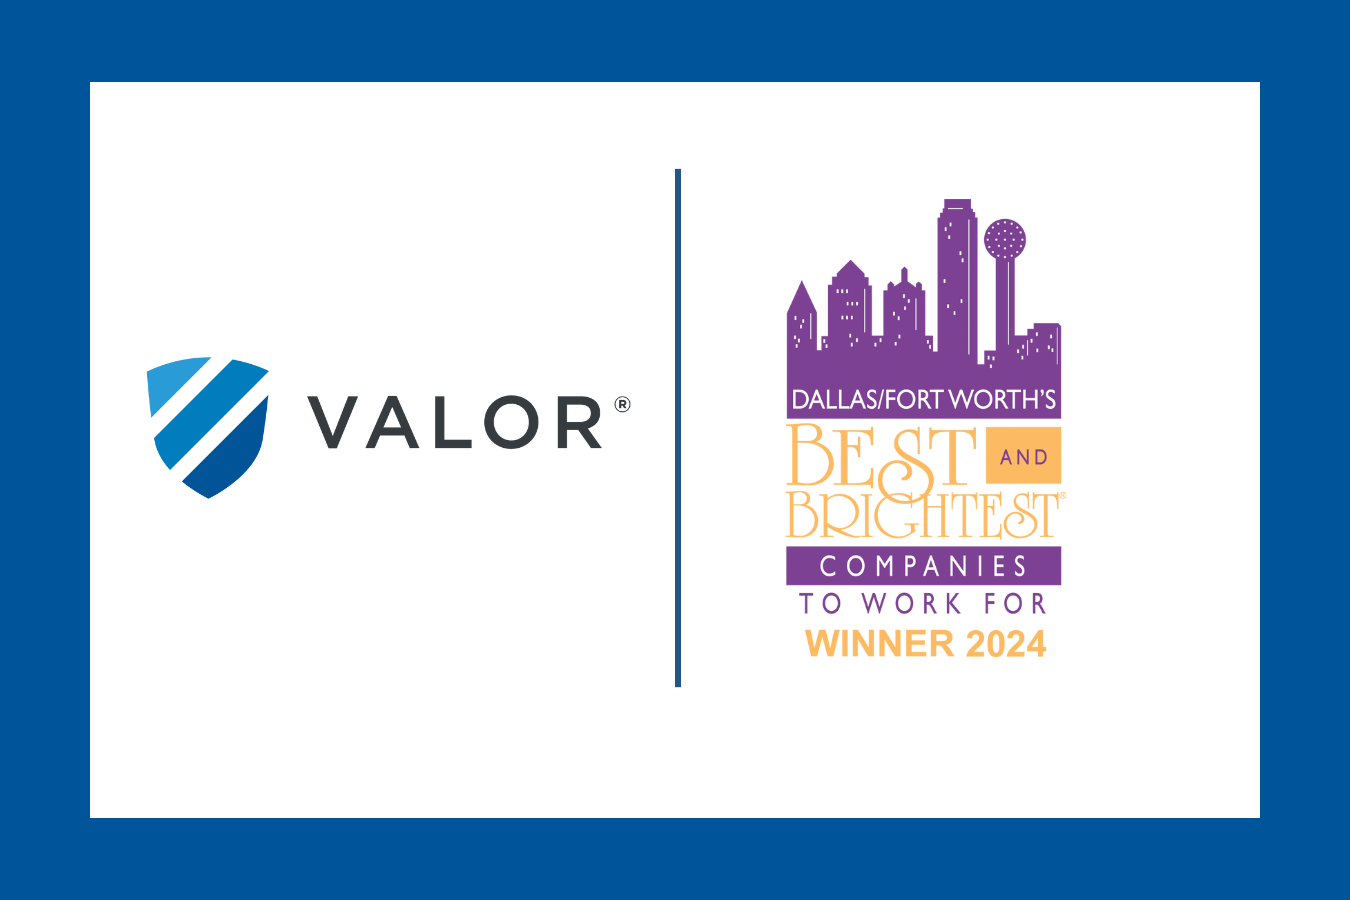 Valor named Best and Brightest Companies to Work For®